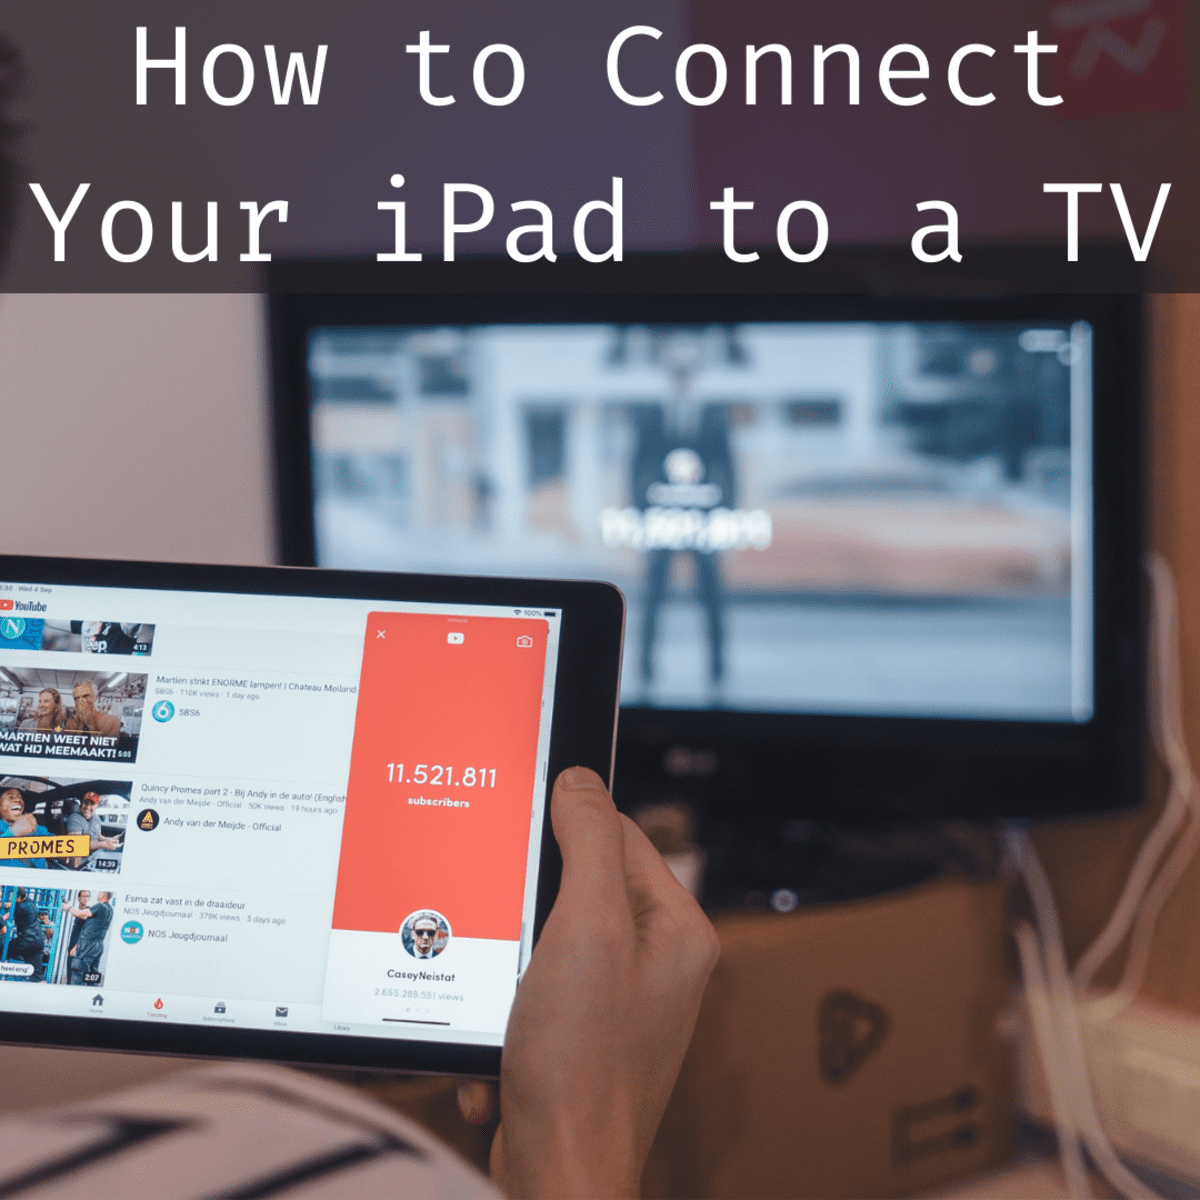 How To Connect An Ipad Tv With Hdmi, Can I Mirror Sky Sports From Ipad To Apple Tv